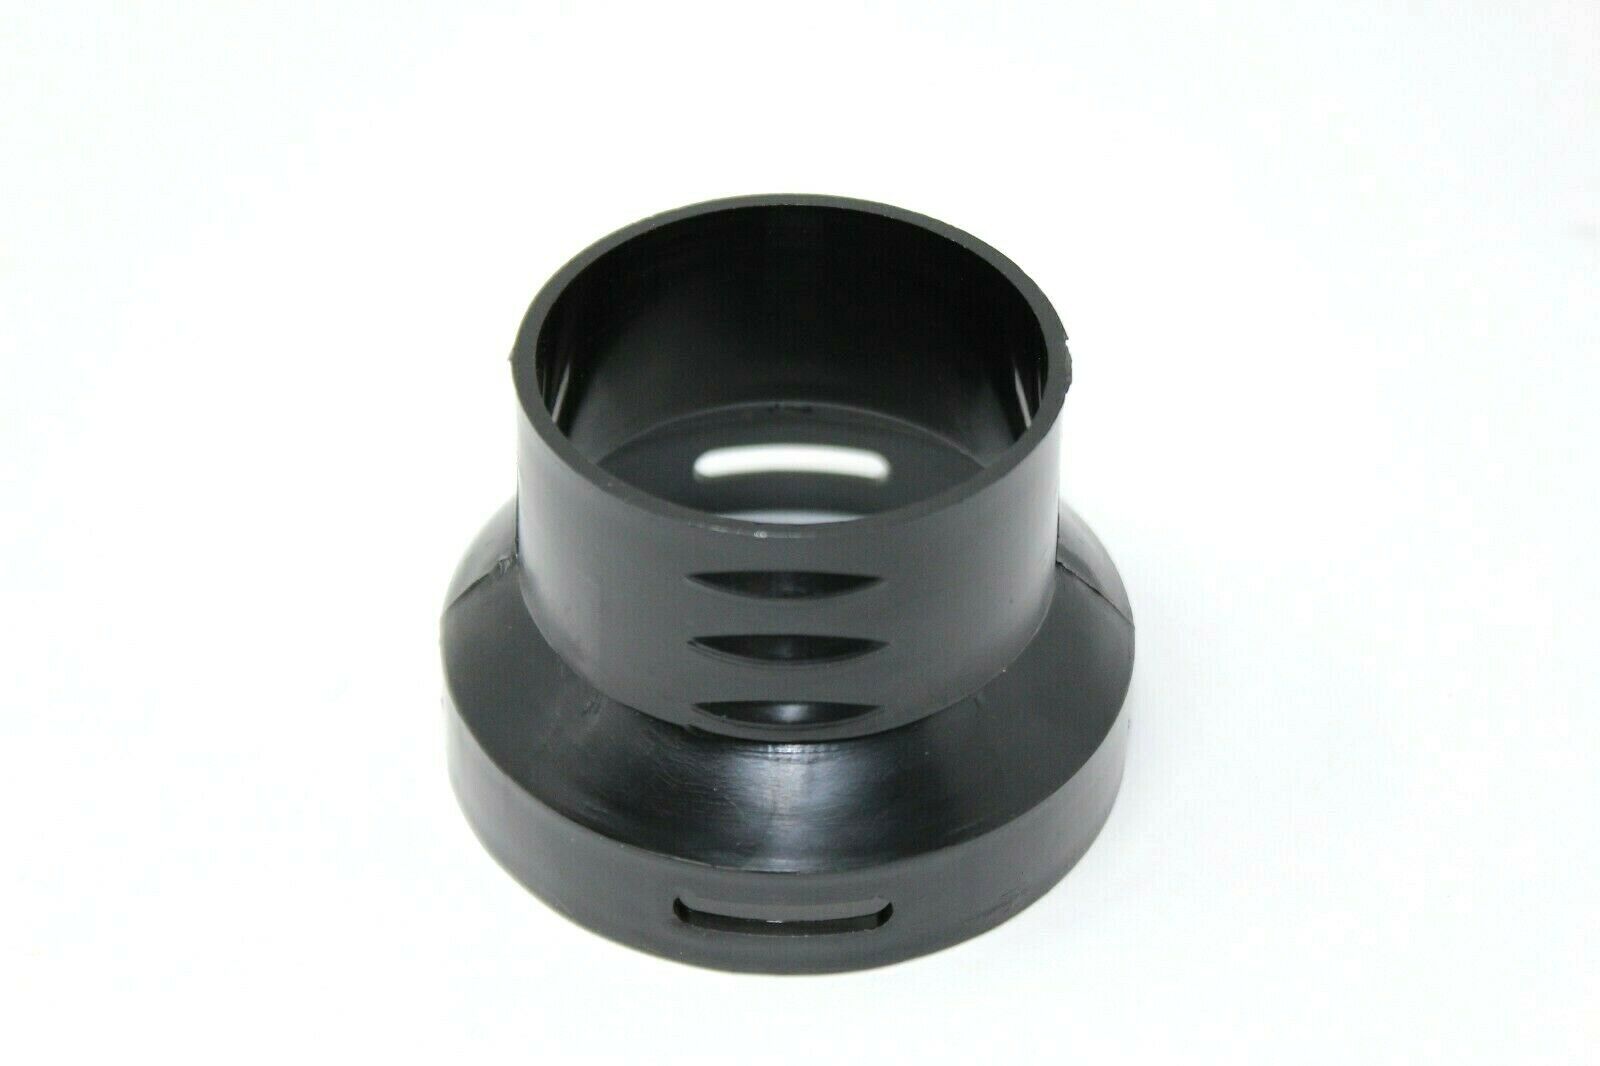 Flexible Duct Connector Step Adapter For 2 Inch To 2.5 Hose 72R4510 Ducting